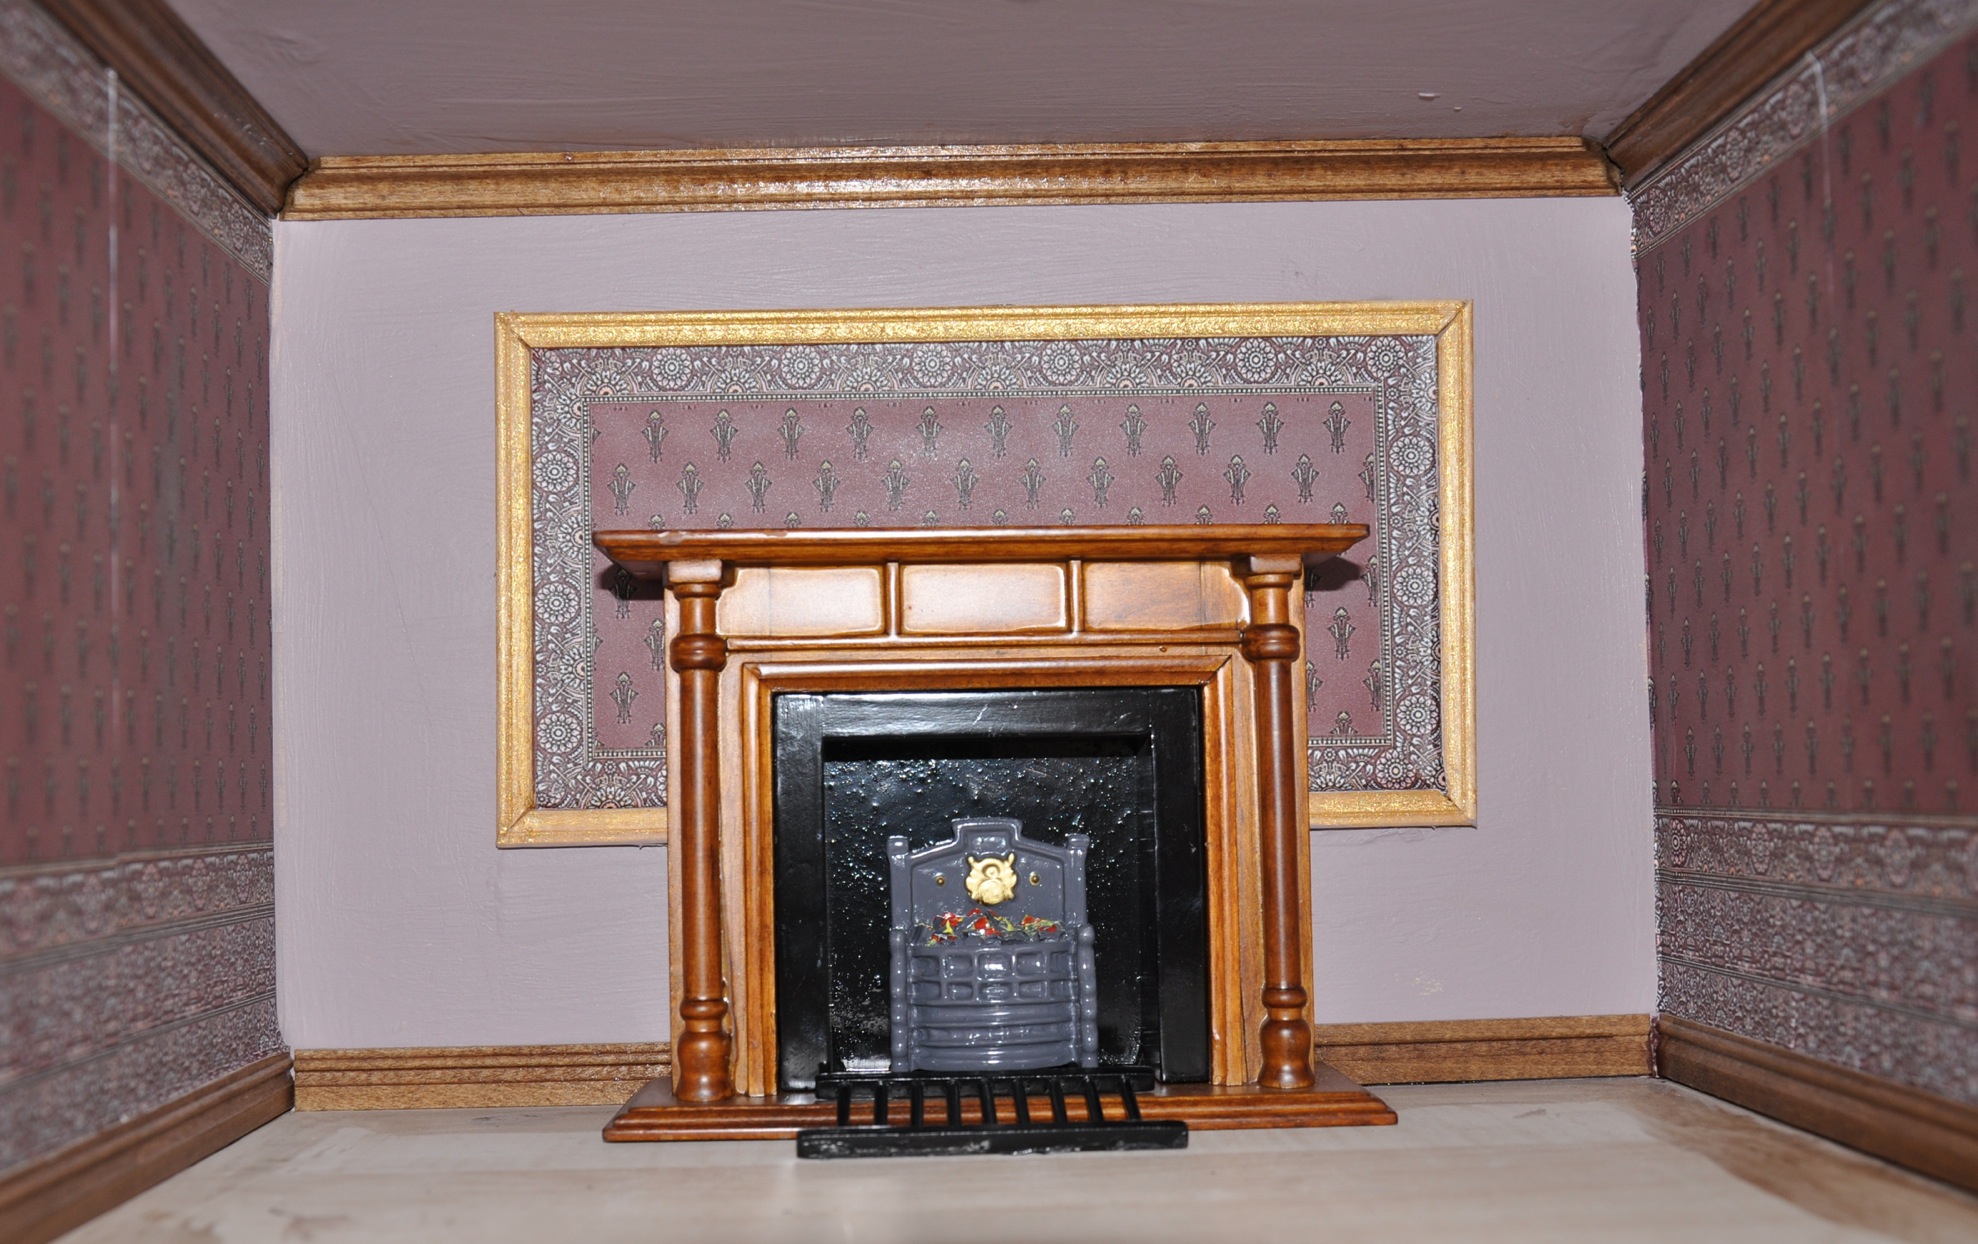 wallpaper on bottom half of wall,hearth,fireplace,room,molding,marble